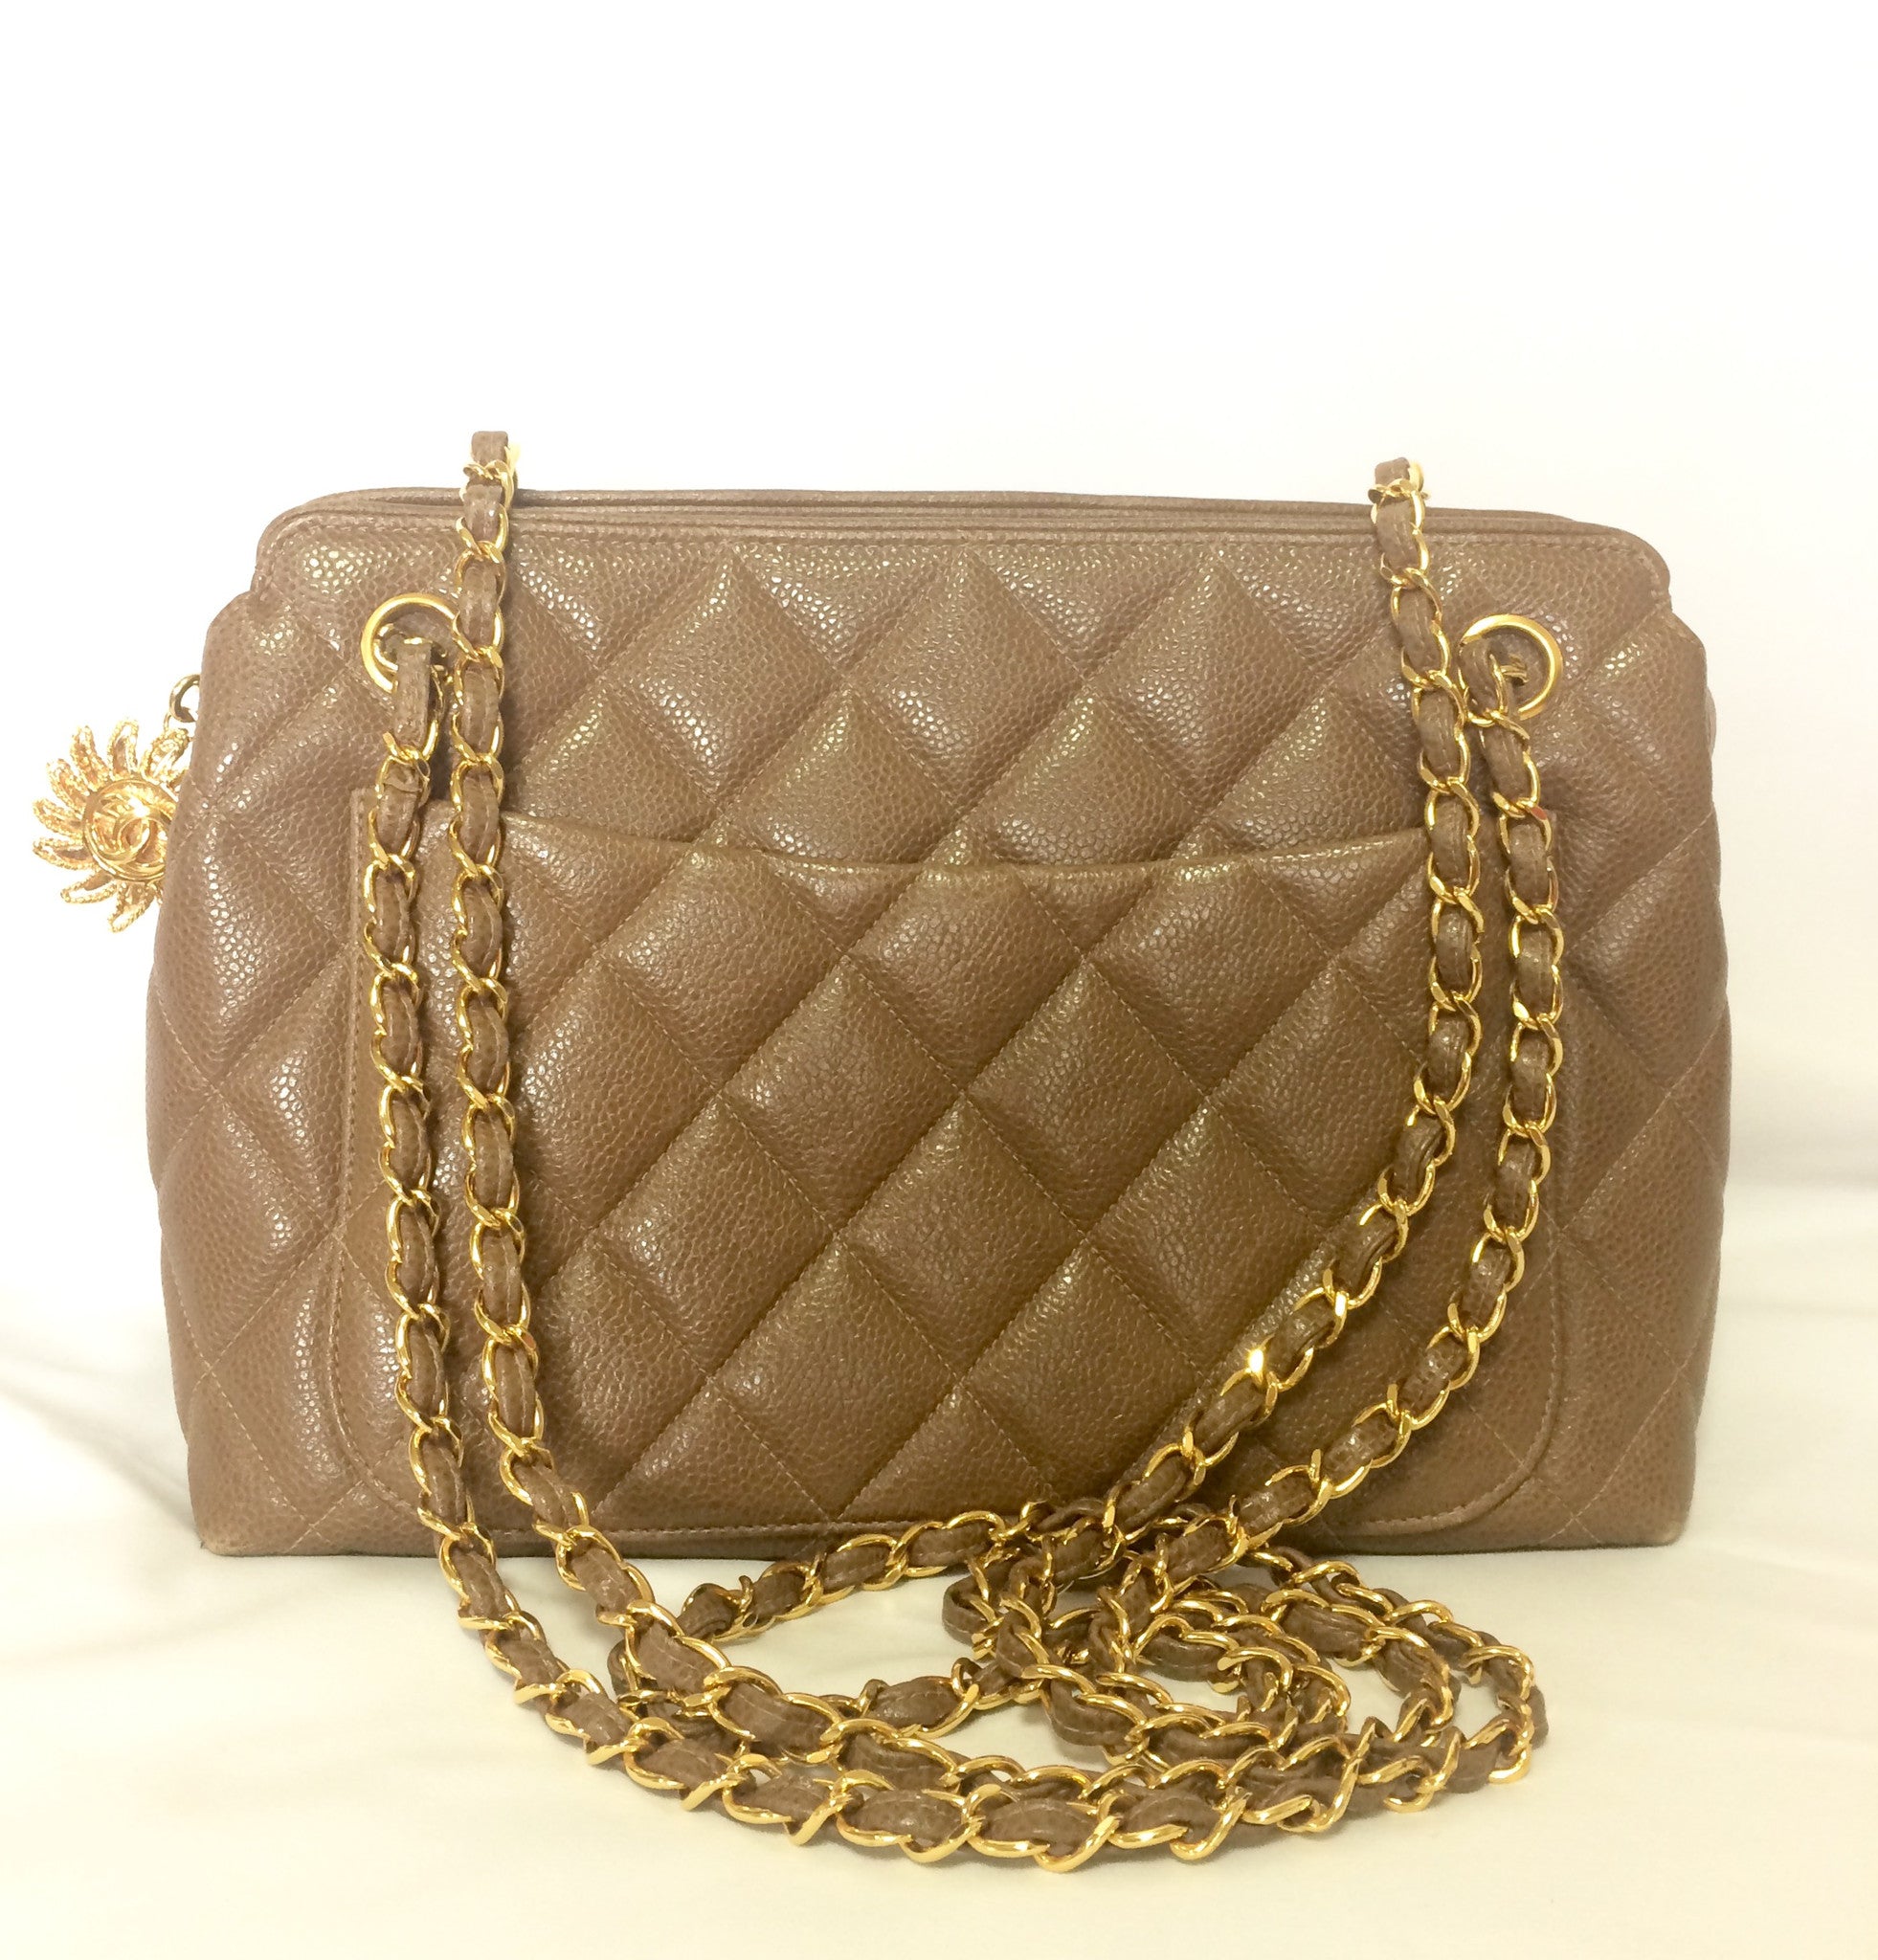 CHANEL Caviar Quilted Handbag in Brown - More Than You Can Imagine